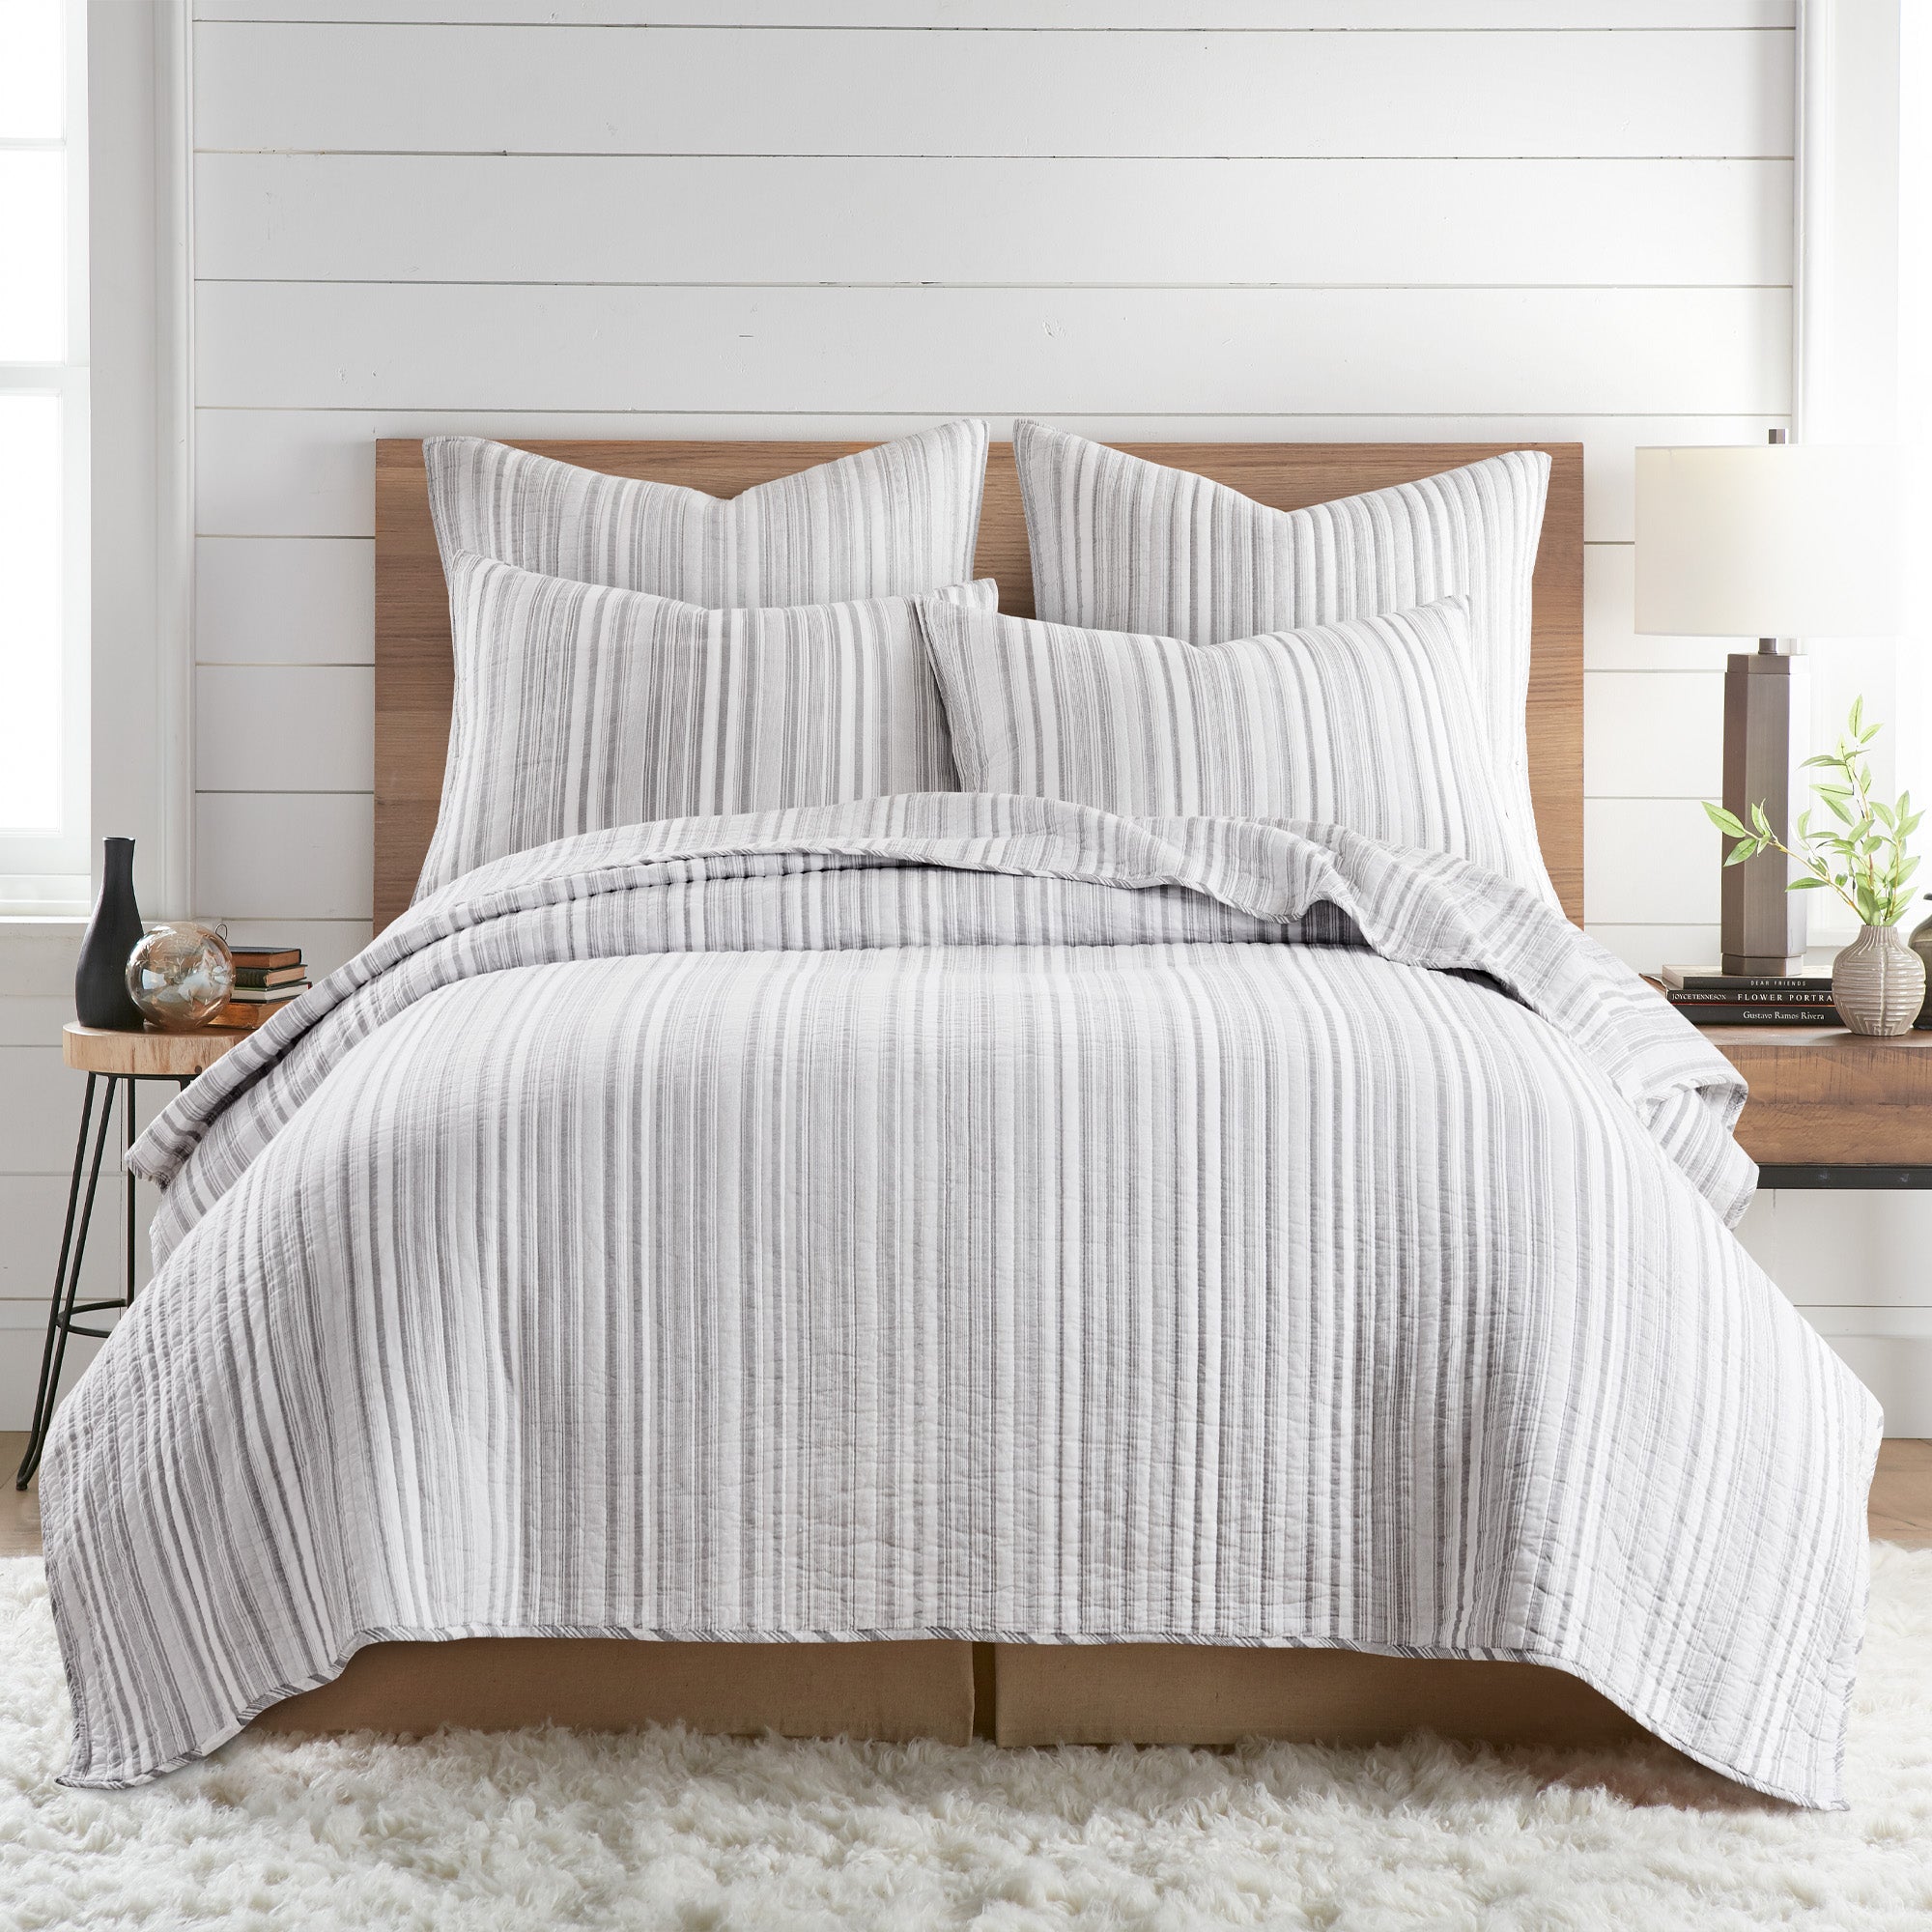 Striped Bedding, Coverlets & Bedding Sets with Stripes